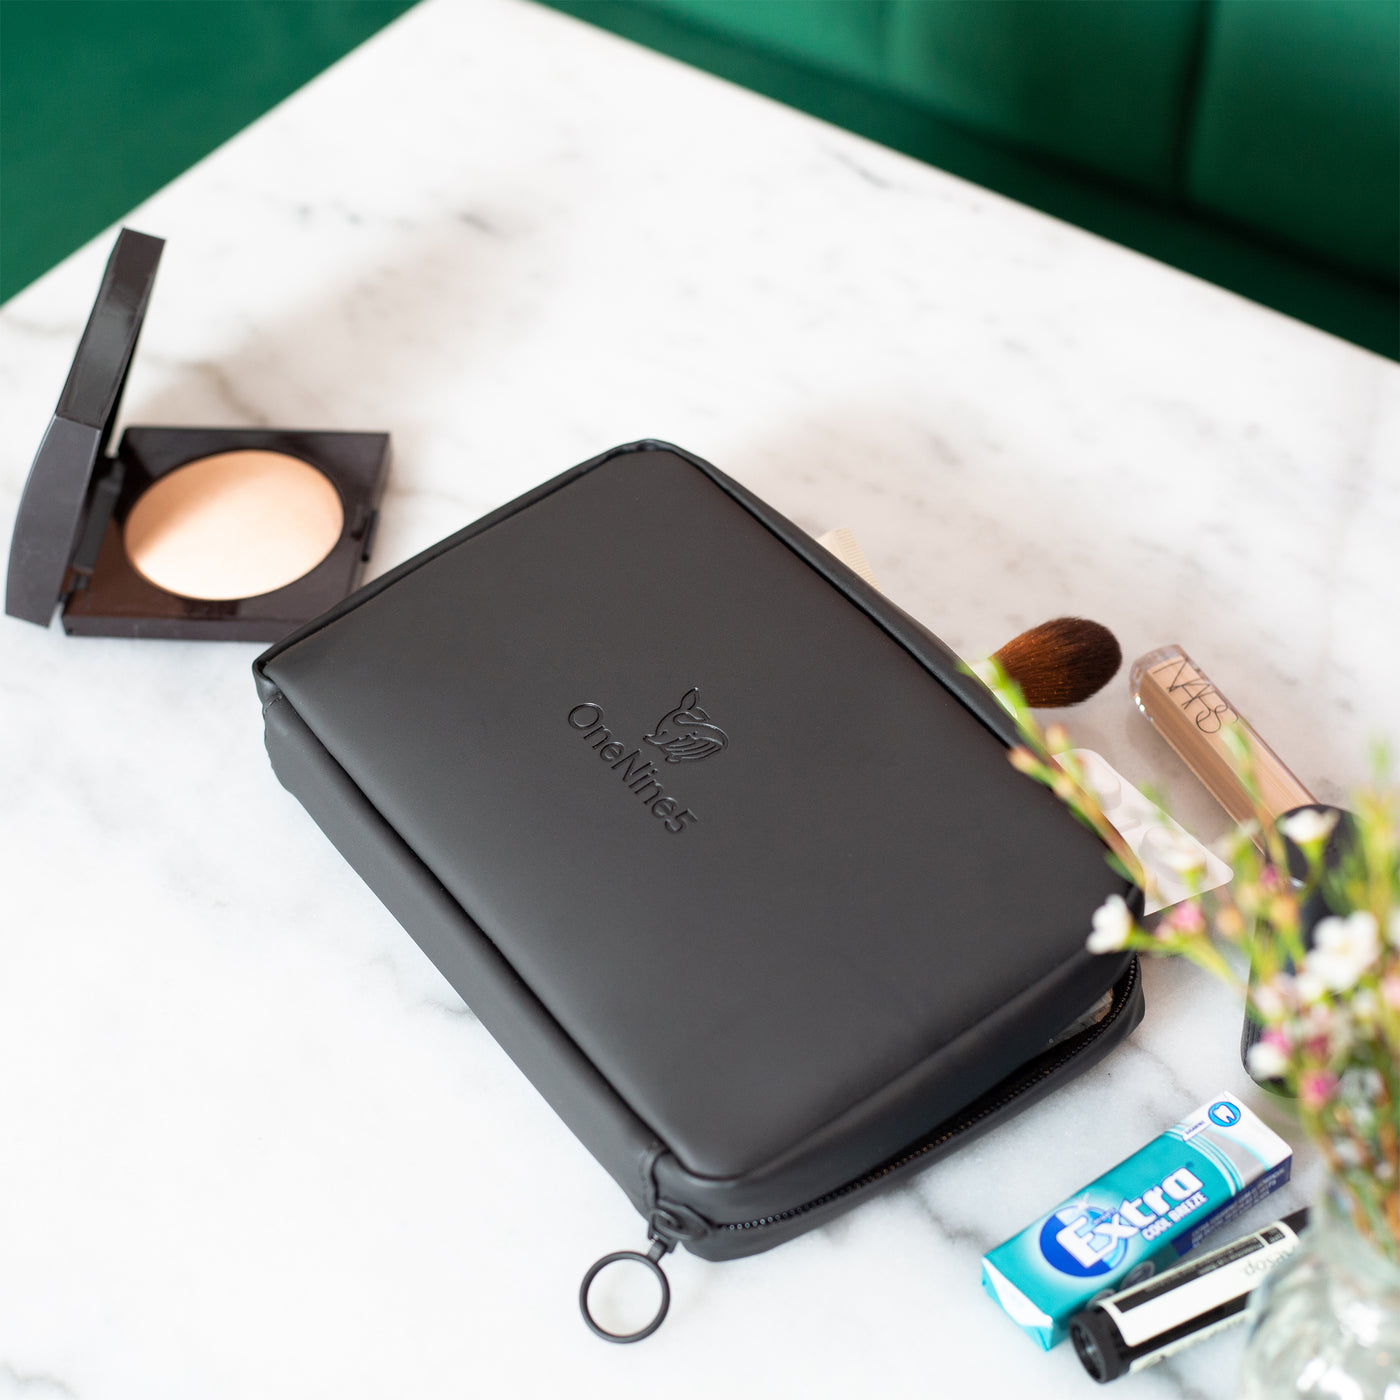 A birdseye shot of the Miho Black Eco Essentials Pouch, laid flat on a marble table with a green velvet bench in the background. On the table alongside the pouch is makeup face powder, NARS Concealer, Wrigleys chewing gum and Aesop lip balm. In the foreground is a slightly blurred out plan in a glass vase.